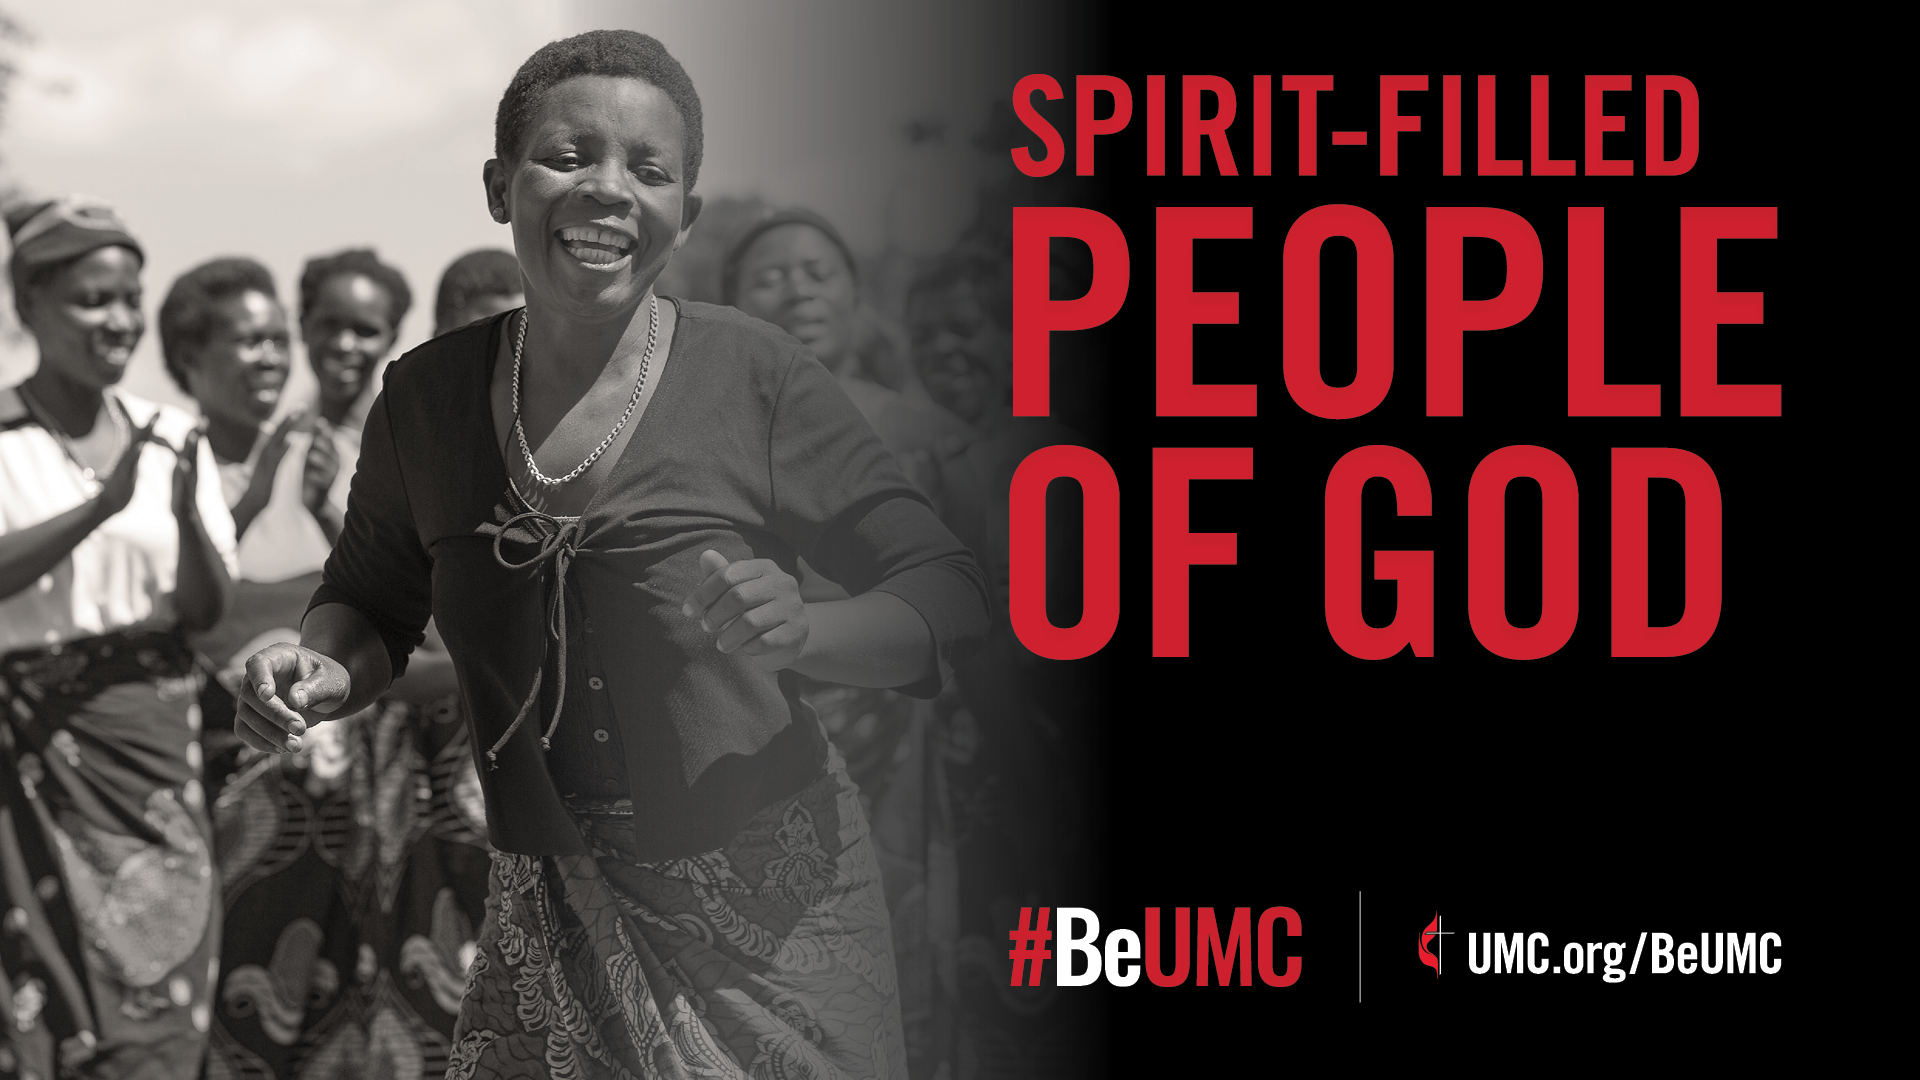 Resources for the Spirit-filled People of God #BeUMC